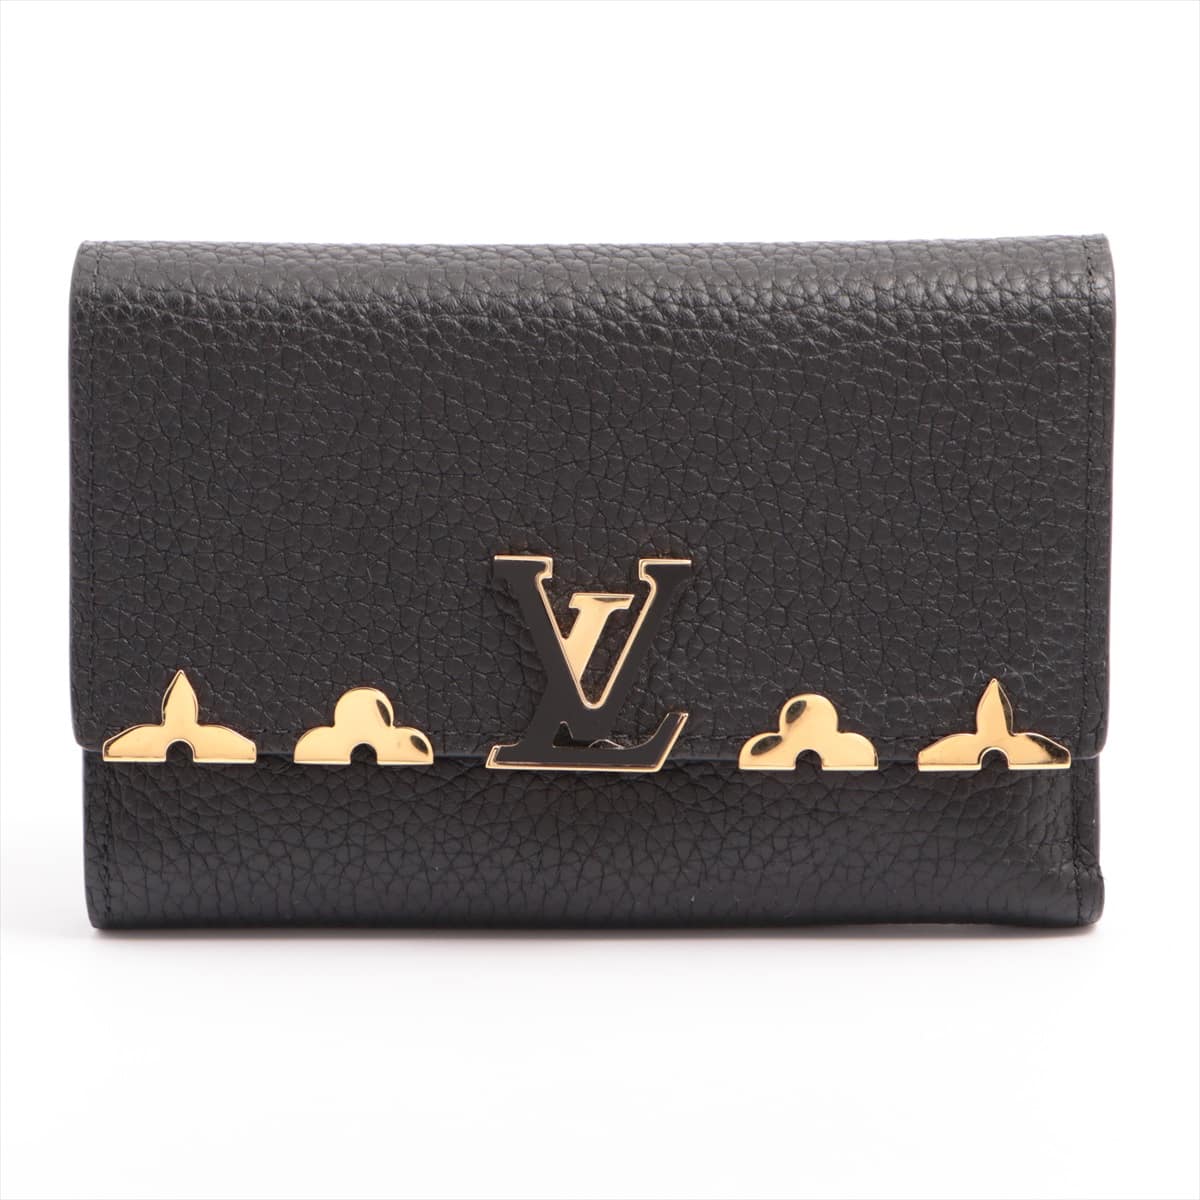 Louis Vuitton Taurillon Portefeuille Capucine compacts M67886 Is one hook buried